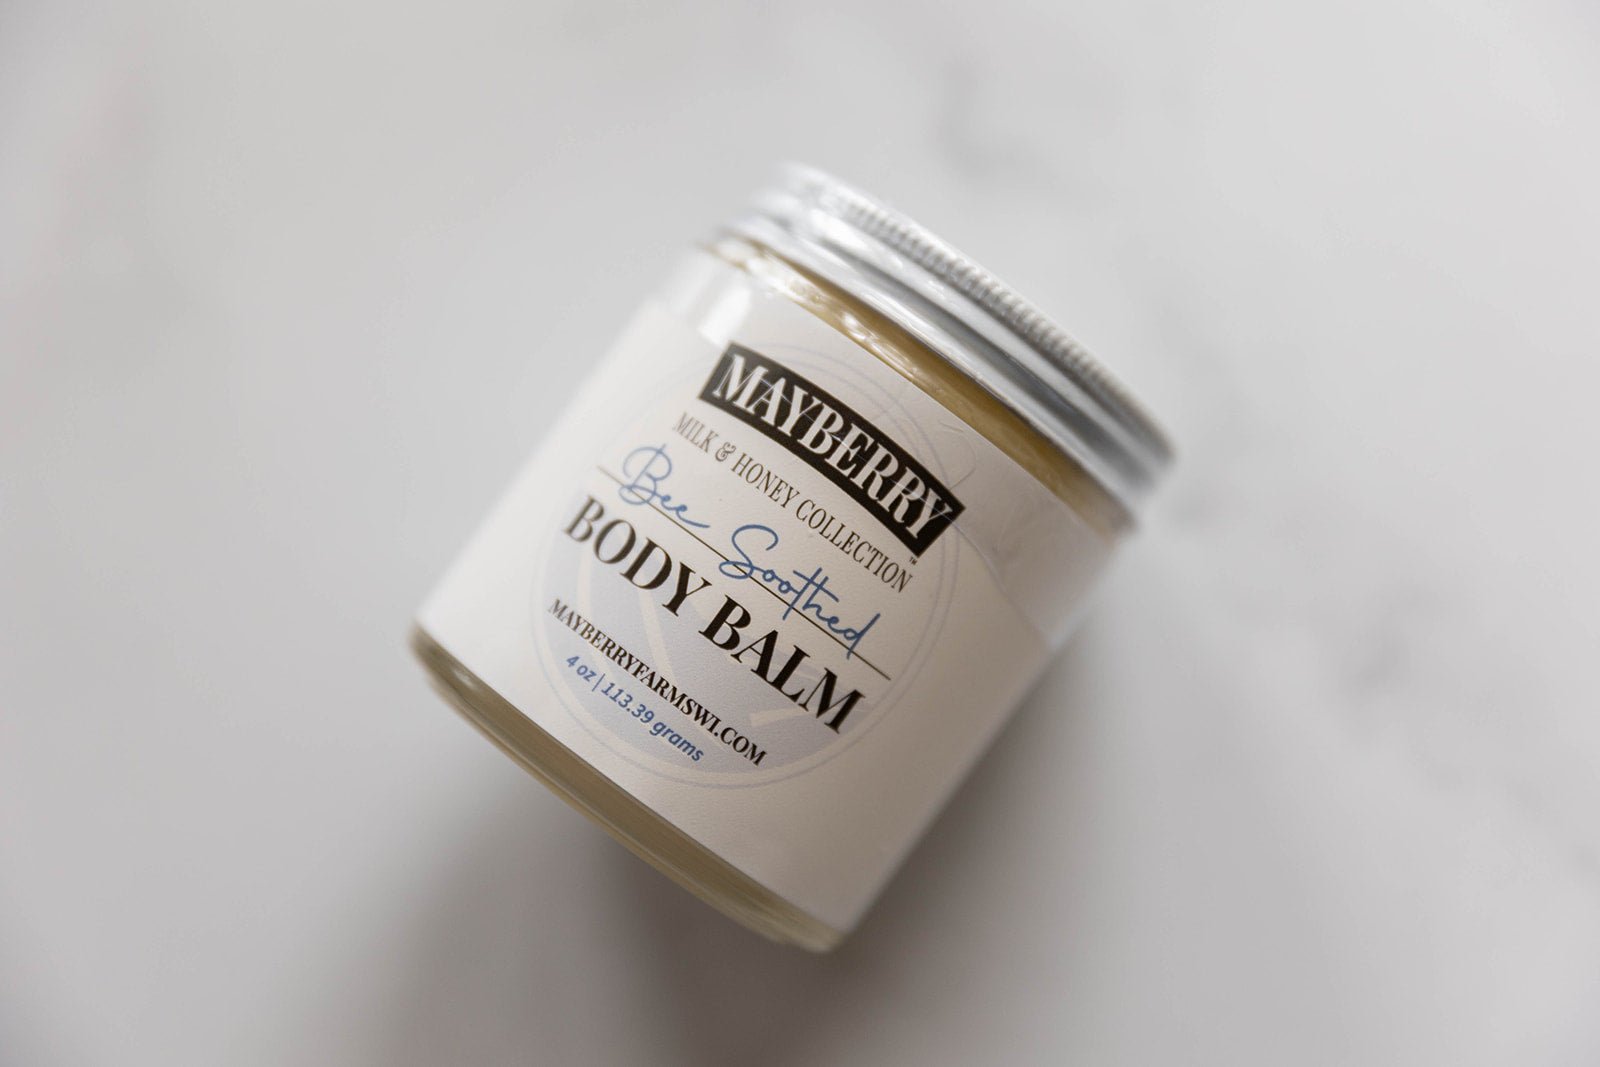 Frankincense Raw Honey and Tallow Whipped Body Balm - Mayberry Farms